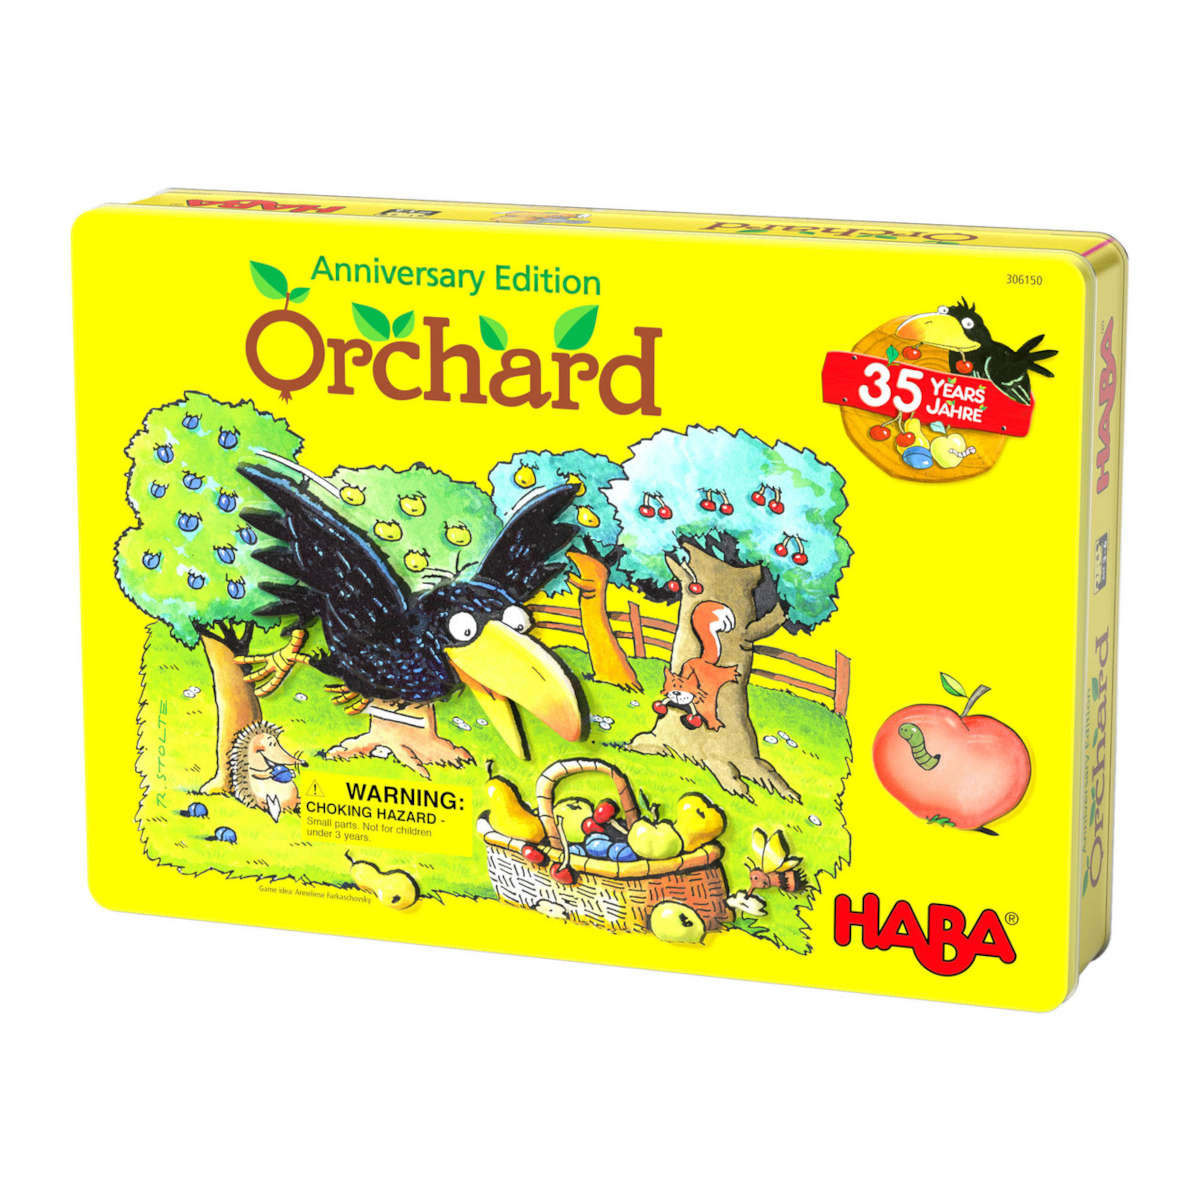 Haba  Orchard 35th Anniversary Edition in Collectors Tin	